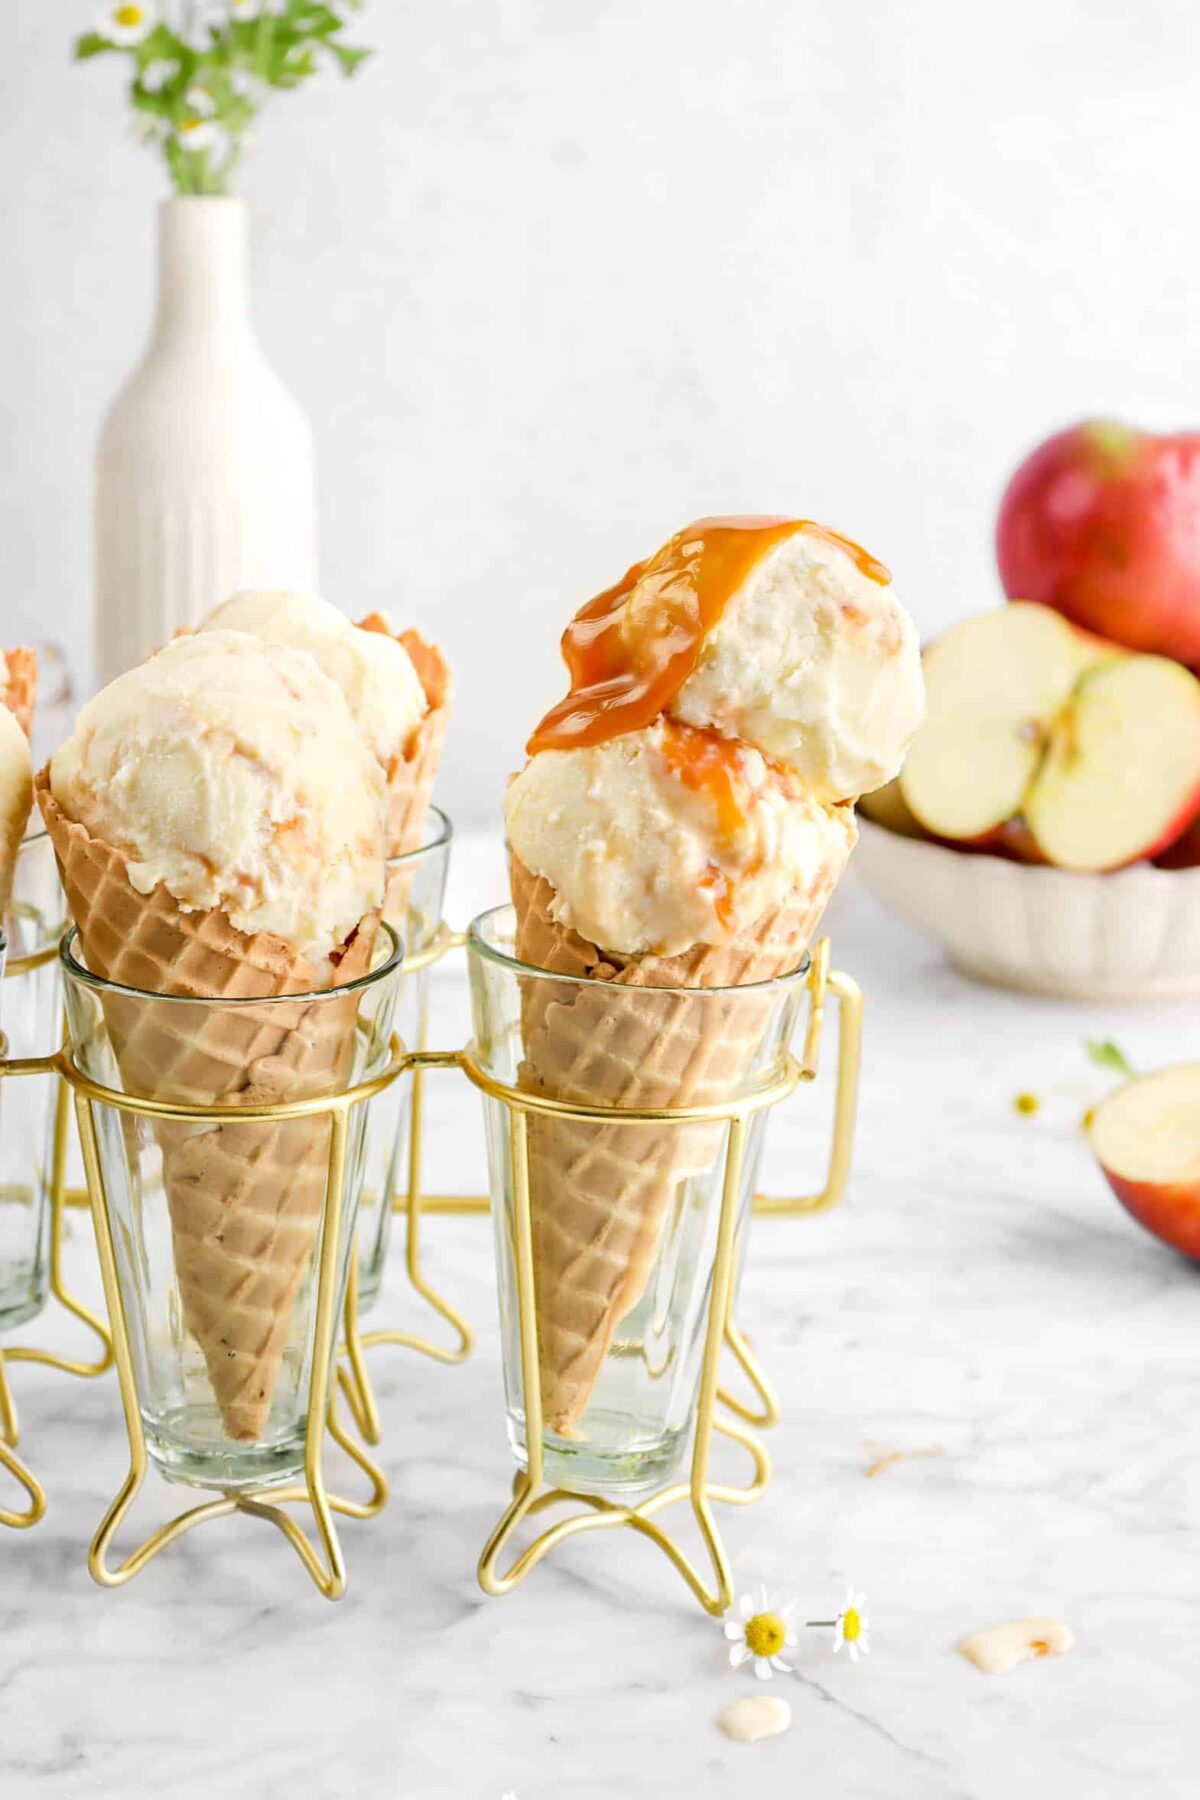 caramel on top of ice cream in drink caddy with apples behind